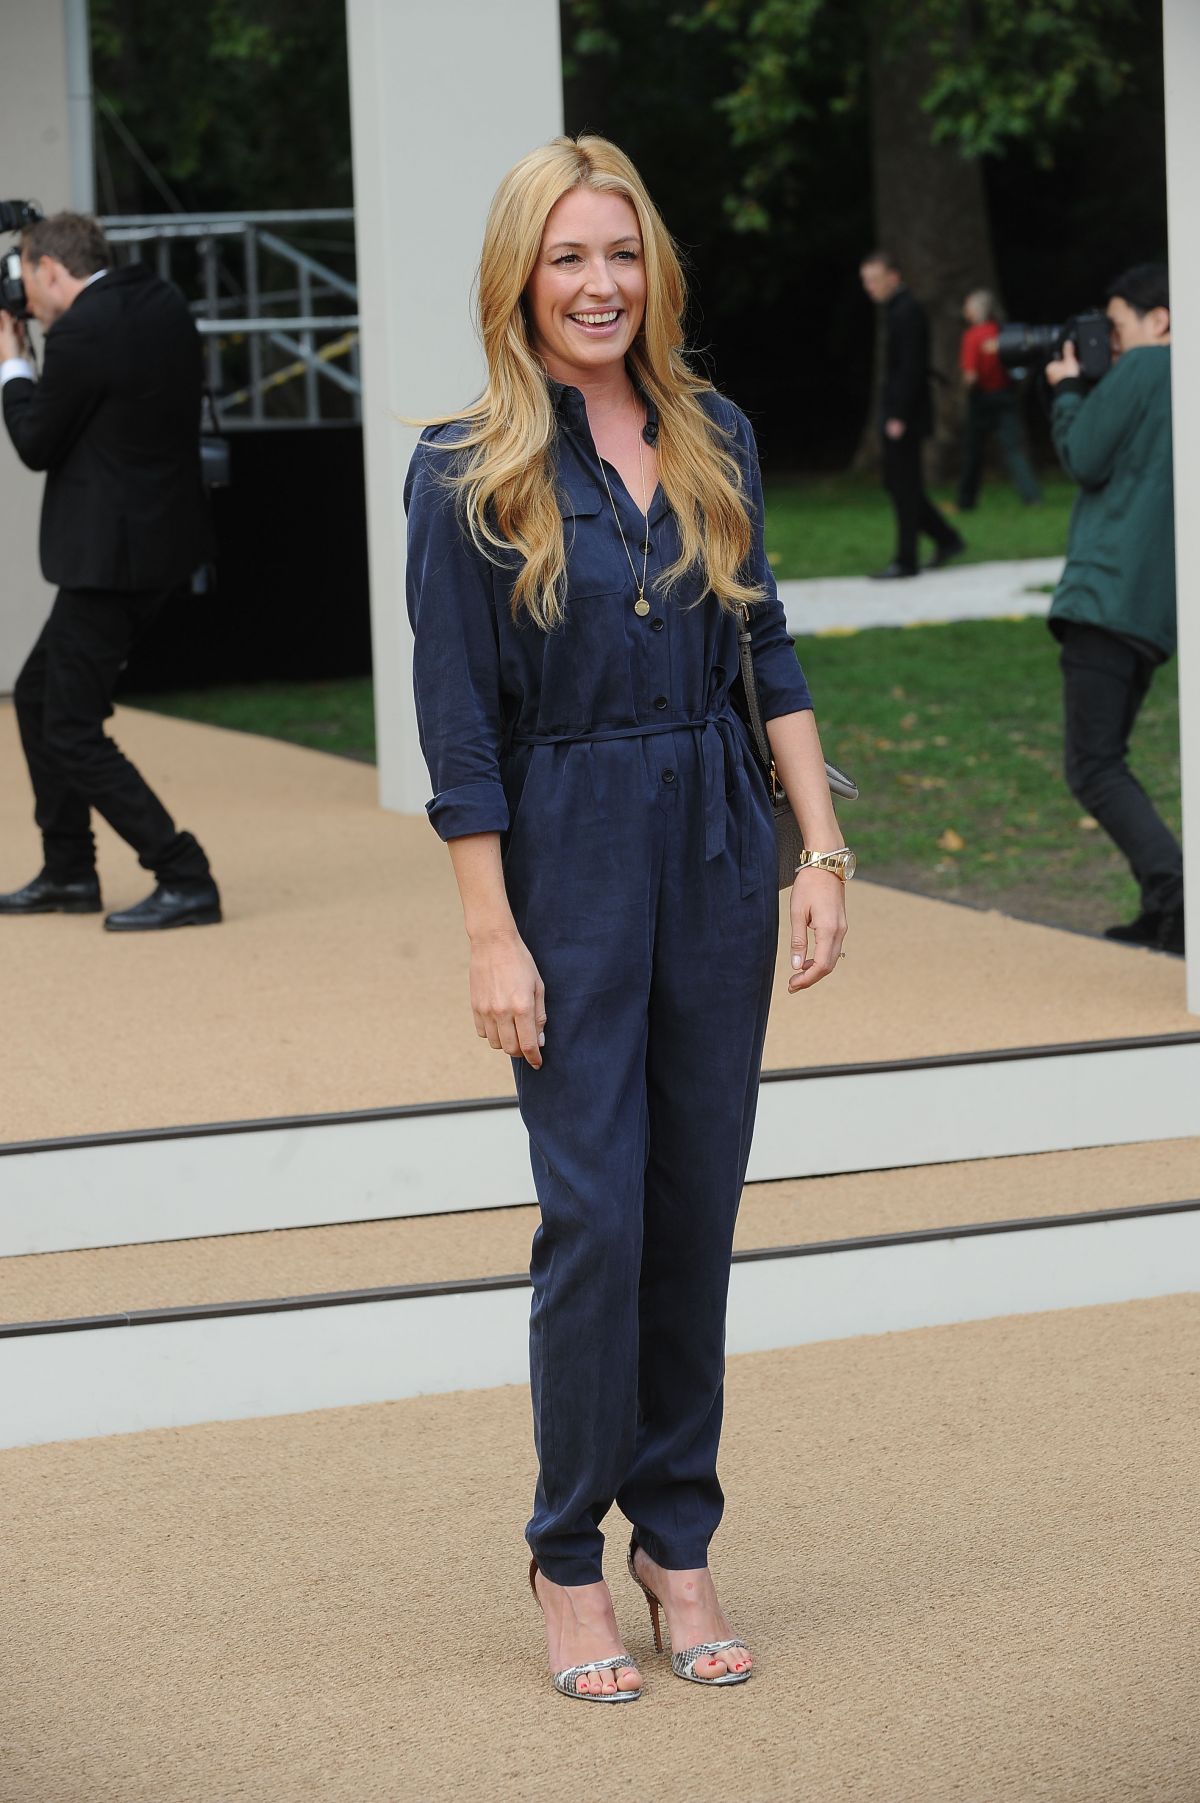 CAT DEELEY at Burberry Prorsum Fashion Show in London – HawtCelebs